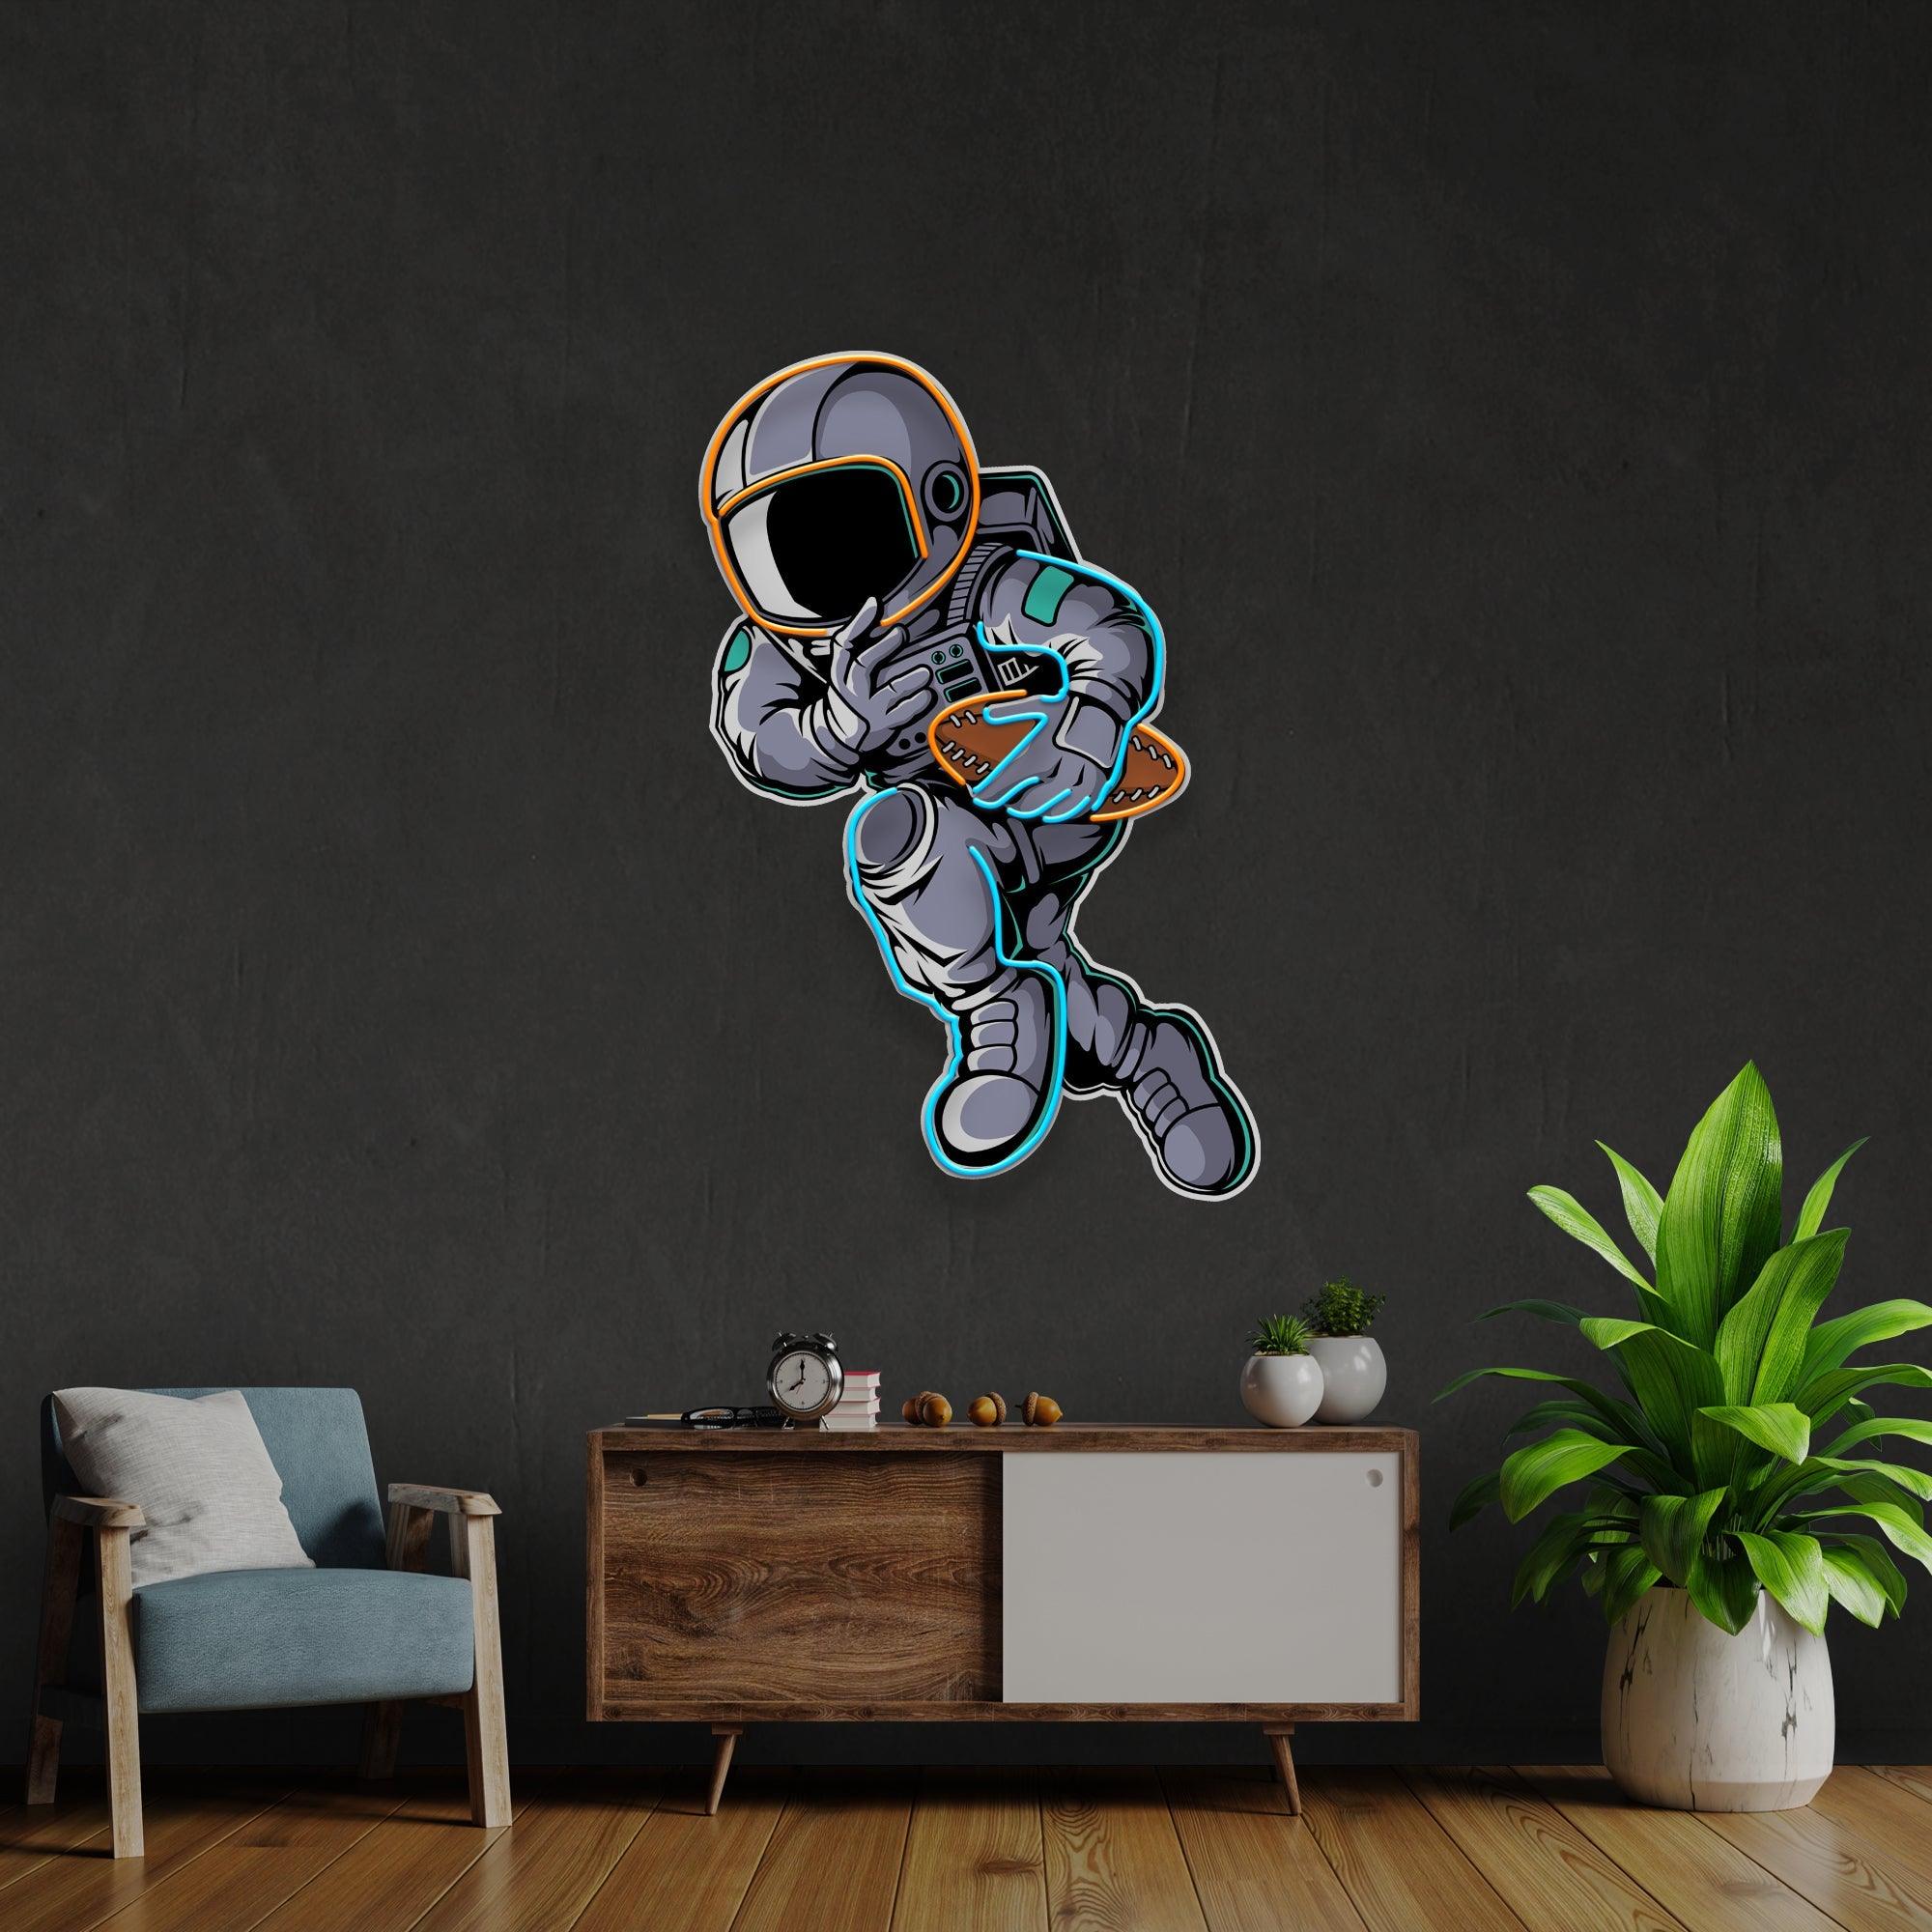 Astronaut Playing Rugby Artwork Led Neon Sign Light - Neonbir